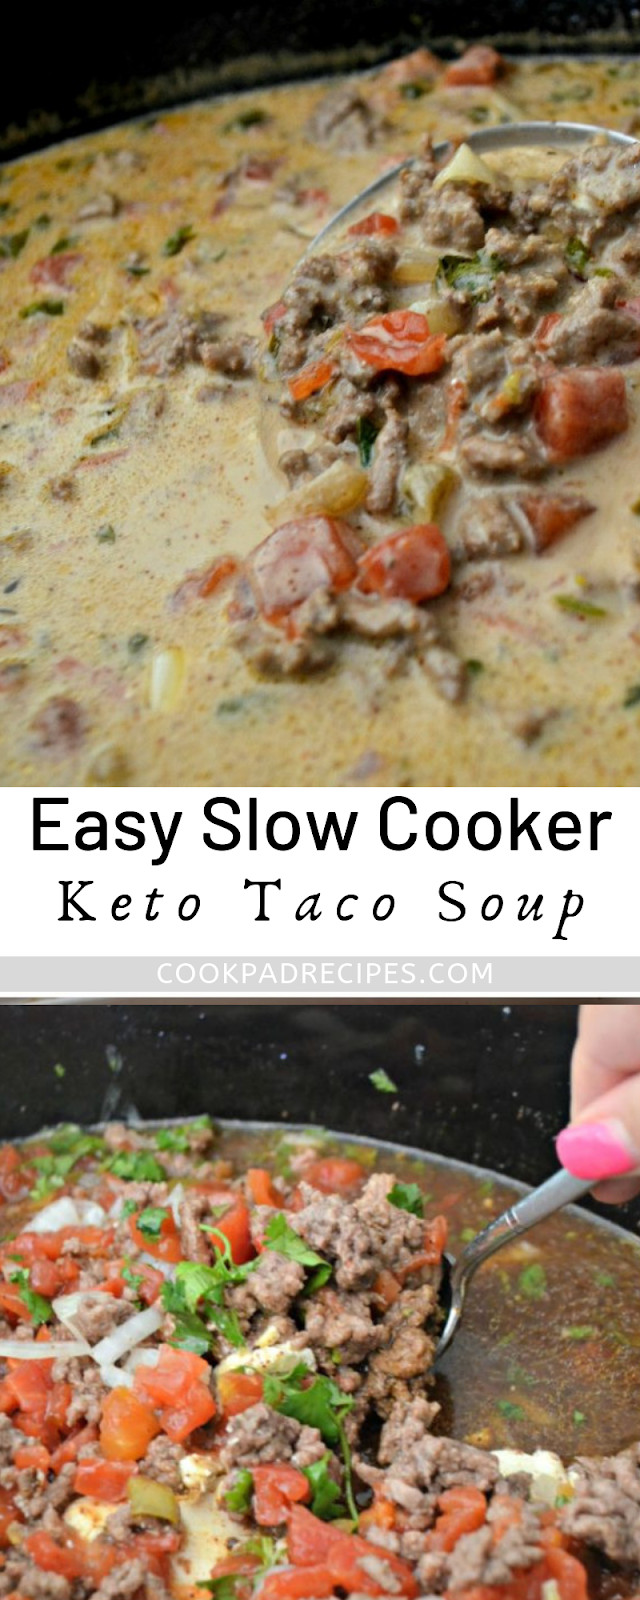 Slow Cooker Keto Recipes Ground Beef
 EASY SLOW COOKER KETO TACO SOUP